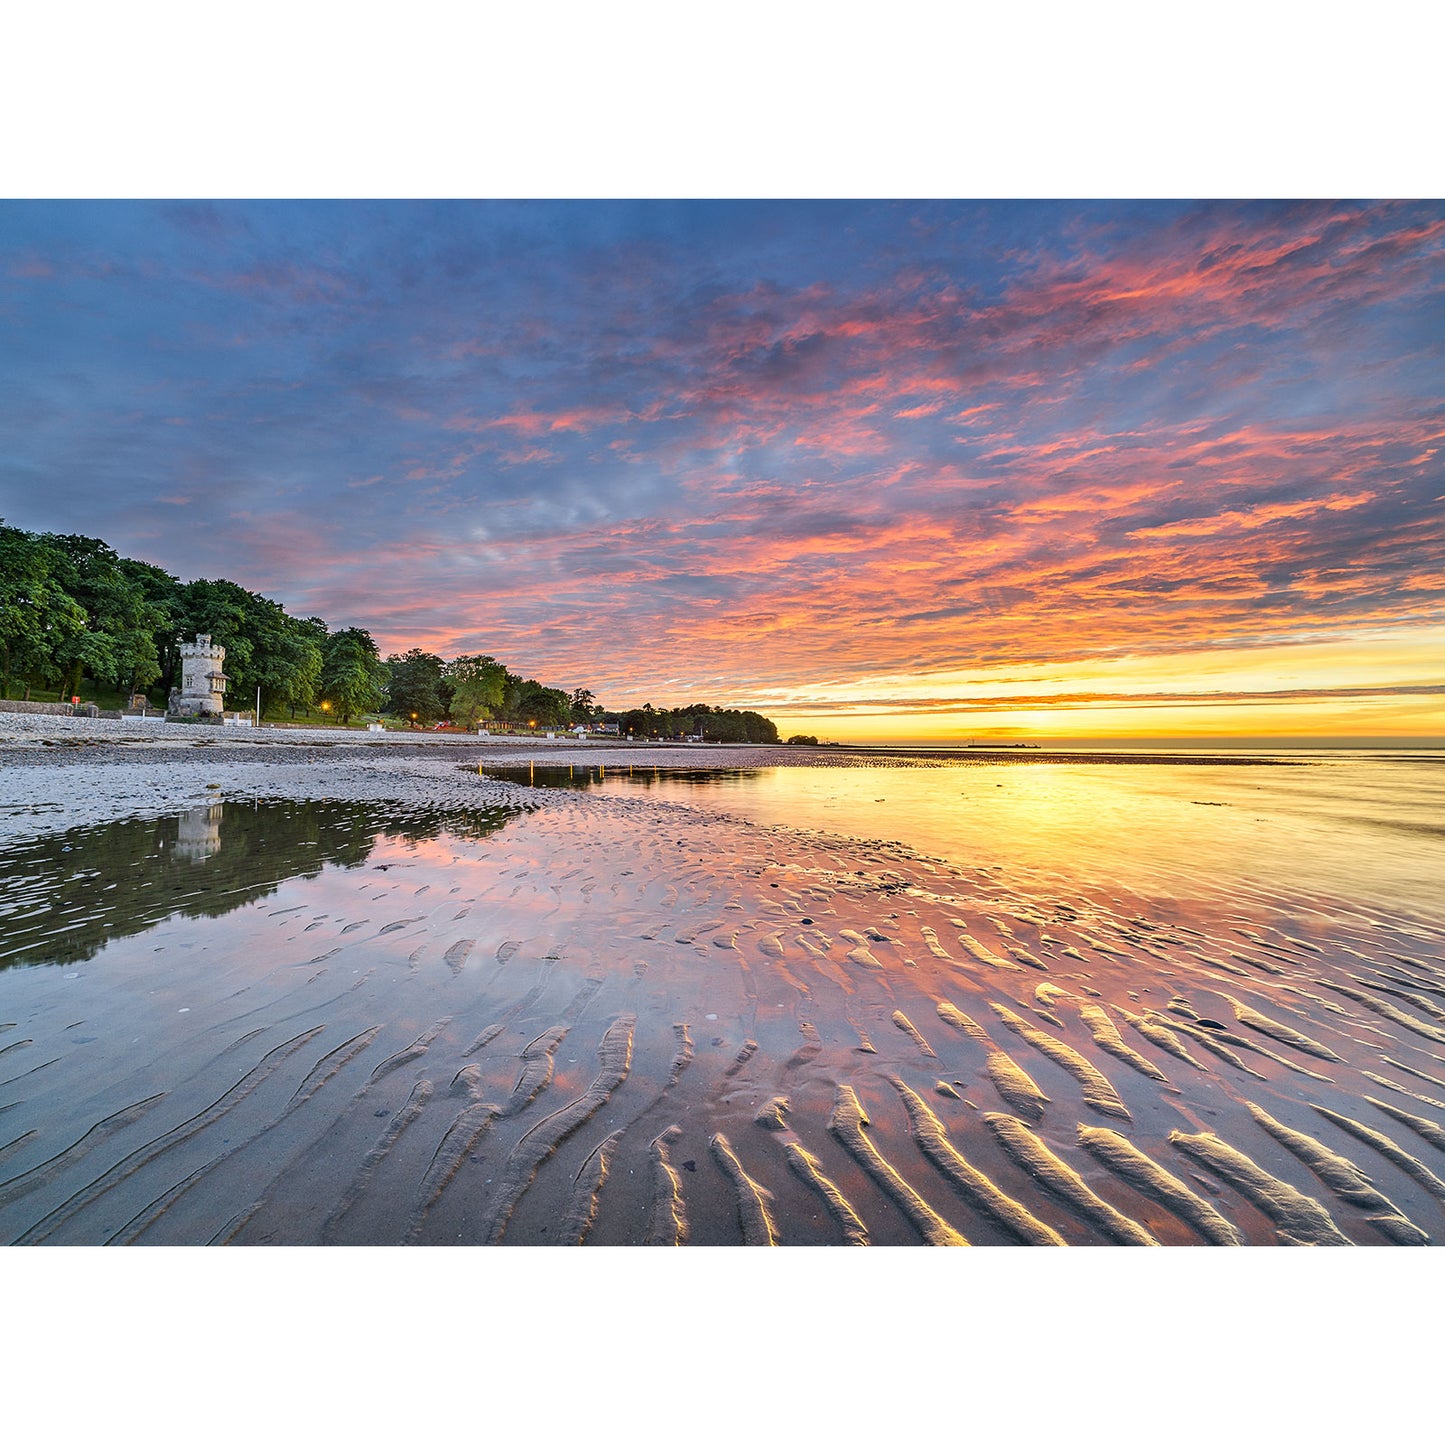 Sunset over the Appley Beach with colorful clouds and rippled sand by Available Light Photography.